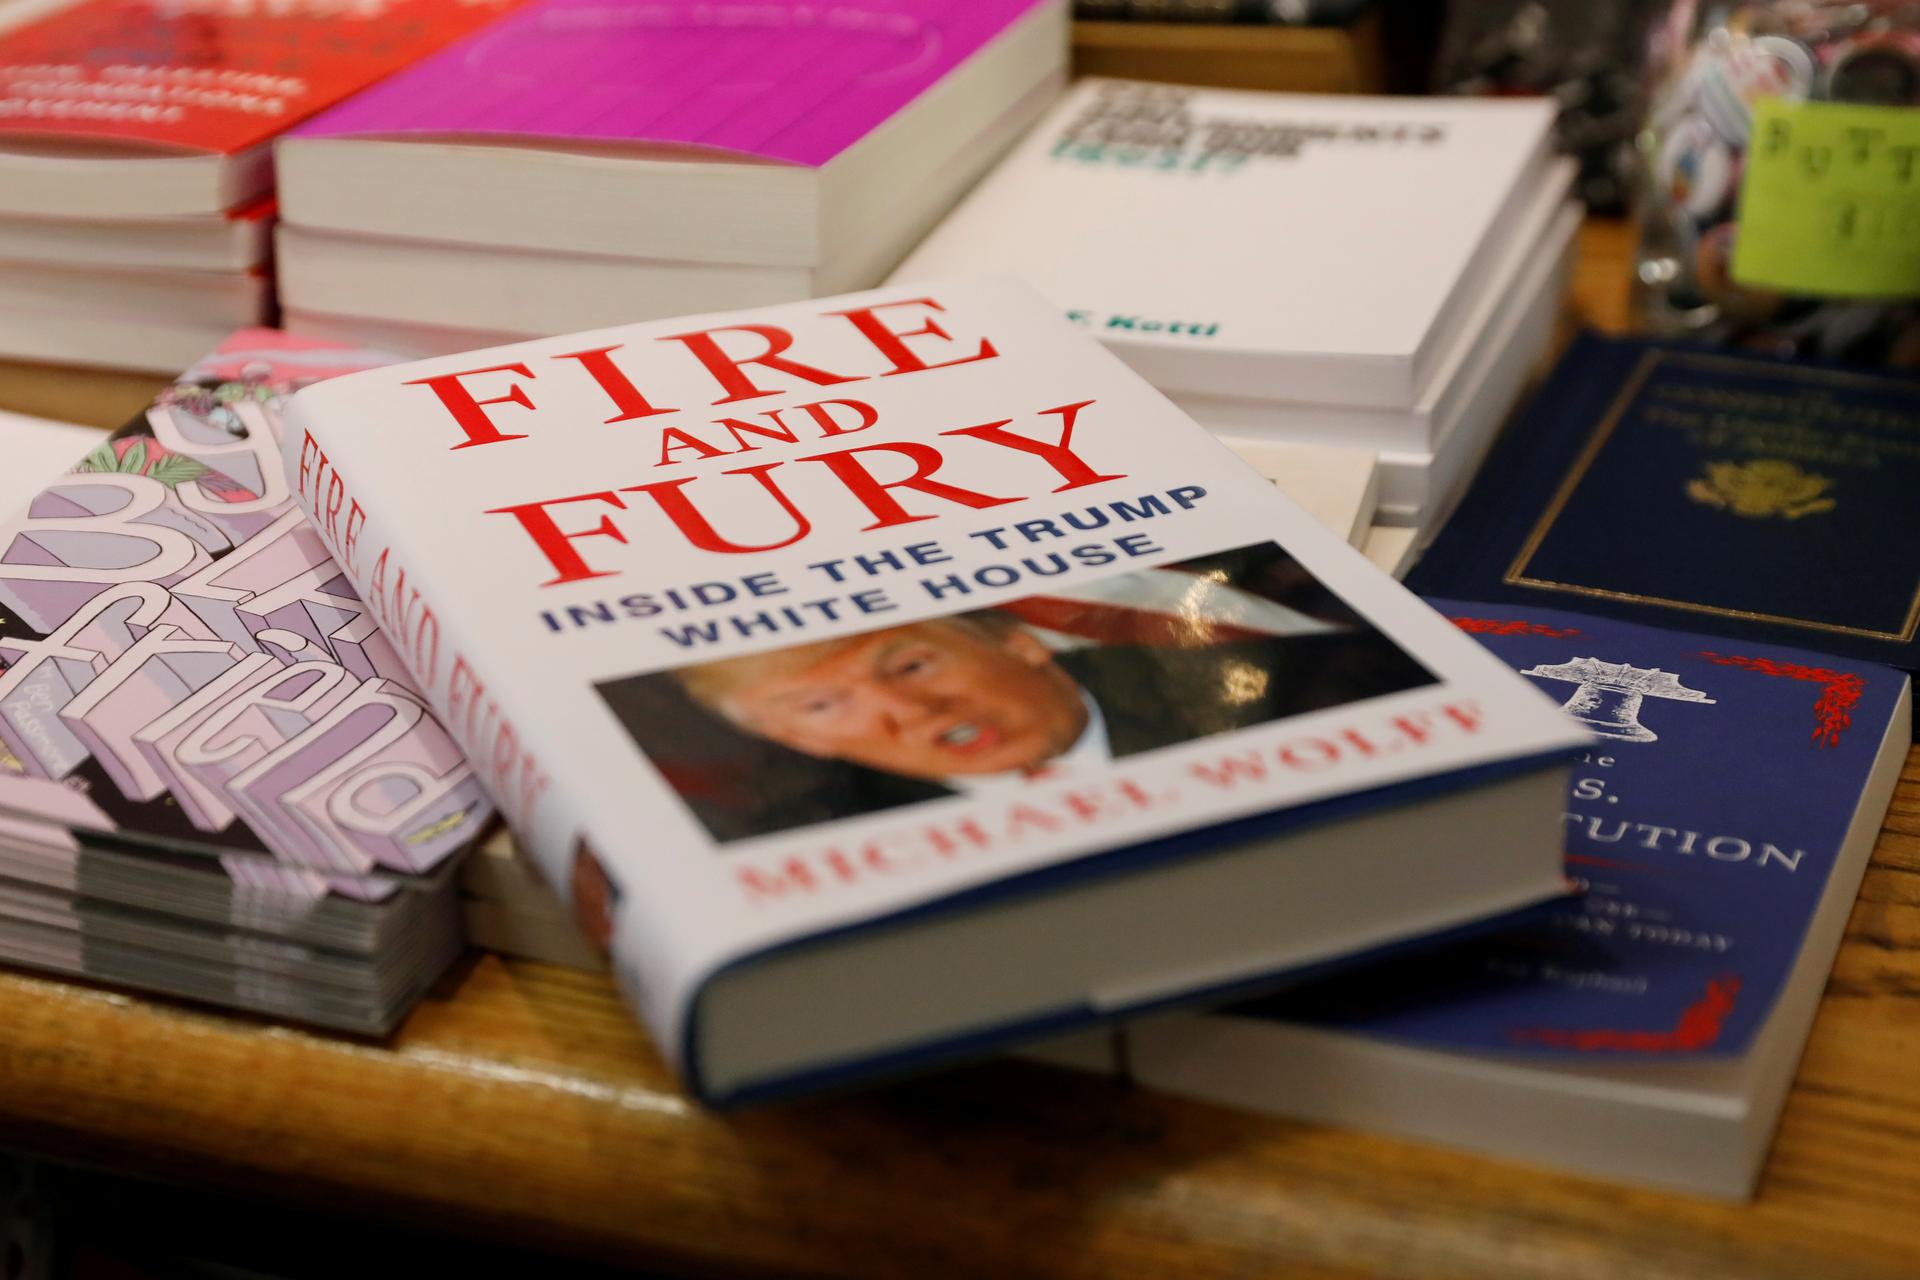 A copy of "Fire and Fury: Inside the Trump White House" at a book store in New York